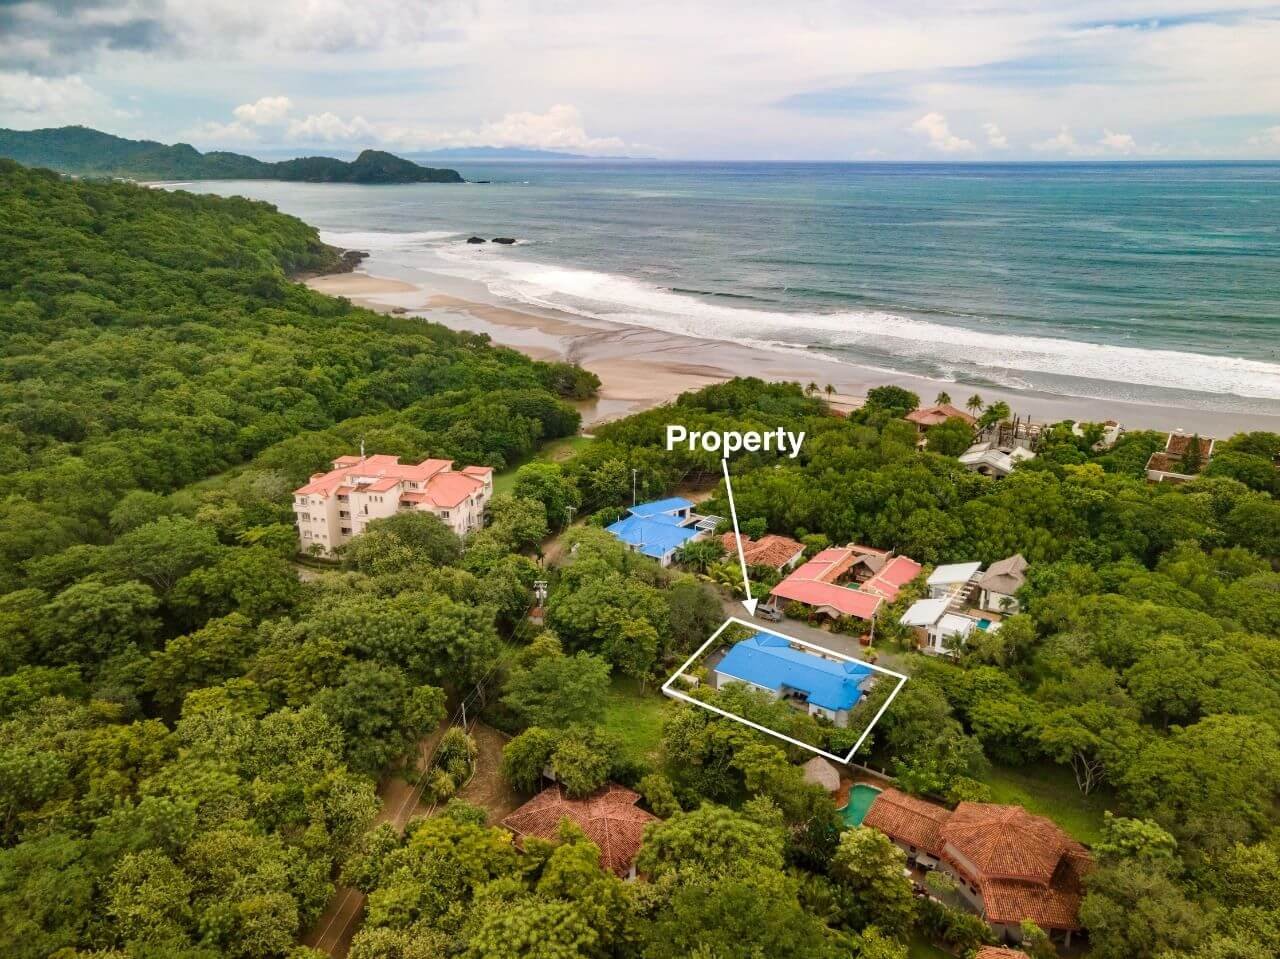 Beachside Bliss at Casita U22: Enjoy Stunning Views and Quick Access to the Ocean in Nicaragua